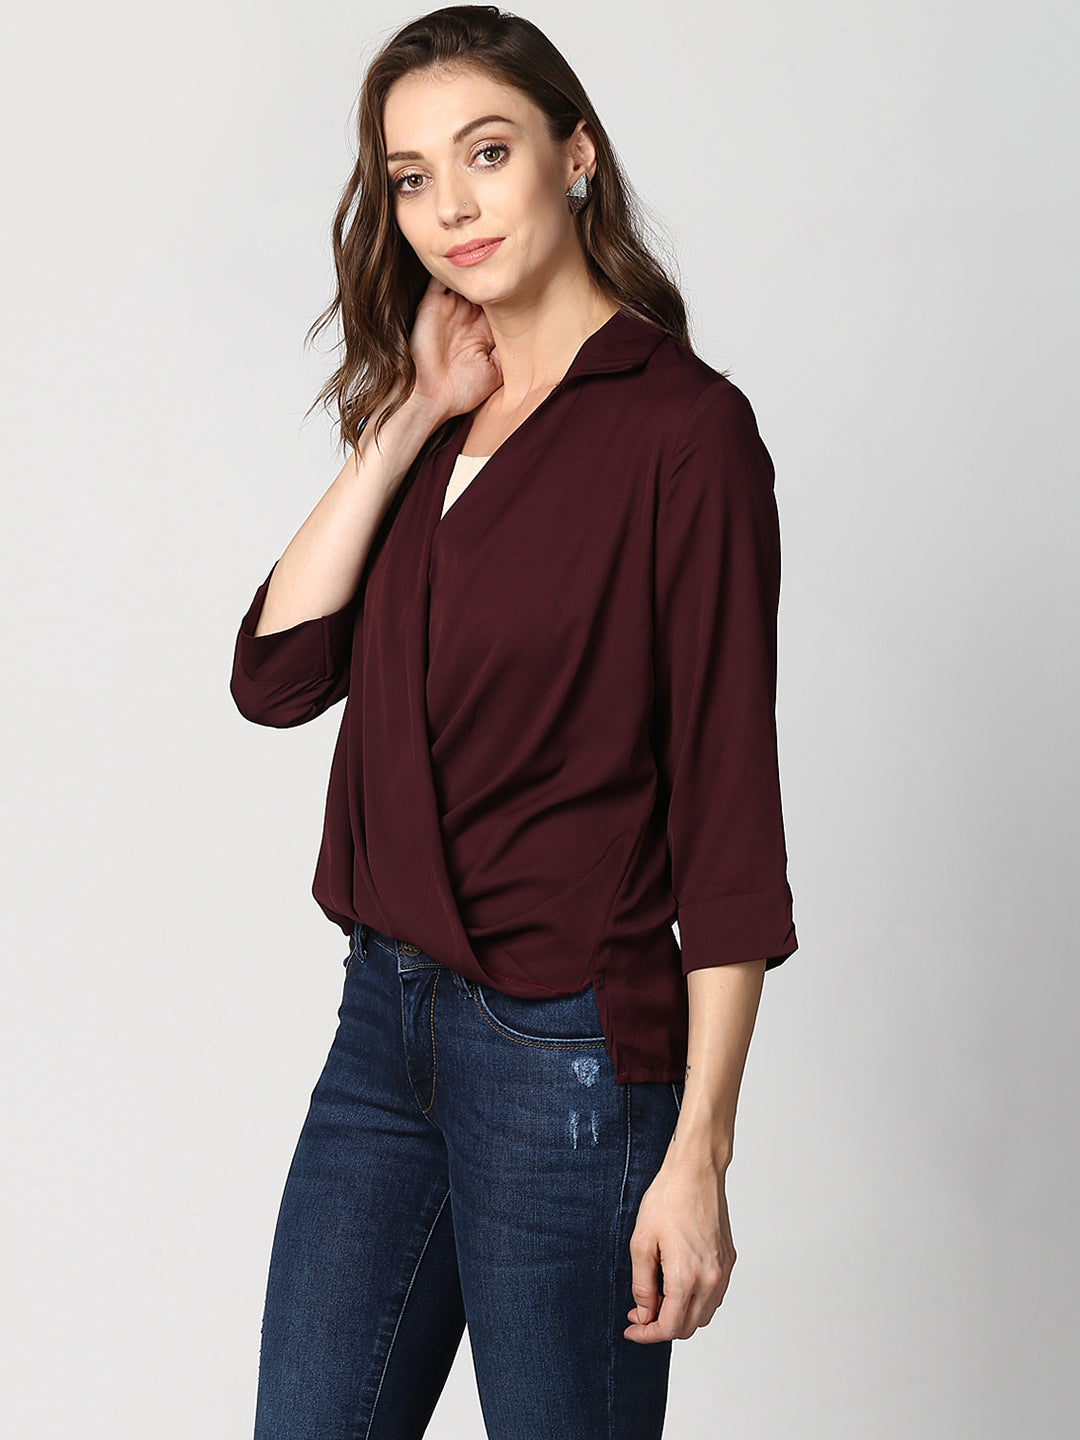 Women's Polyester Maroon Wrap Top